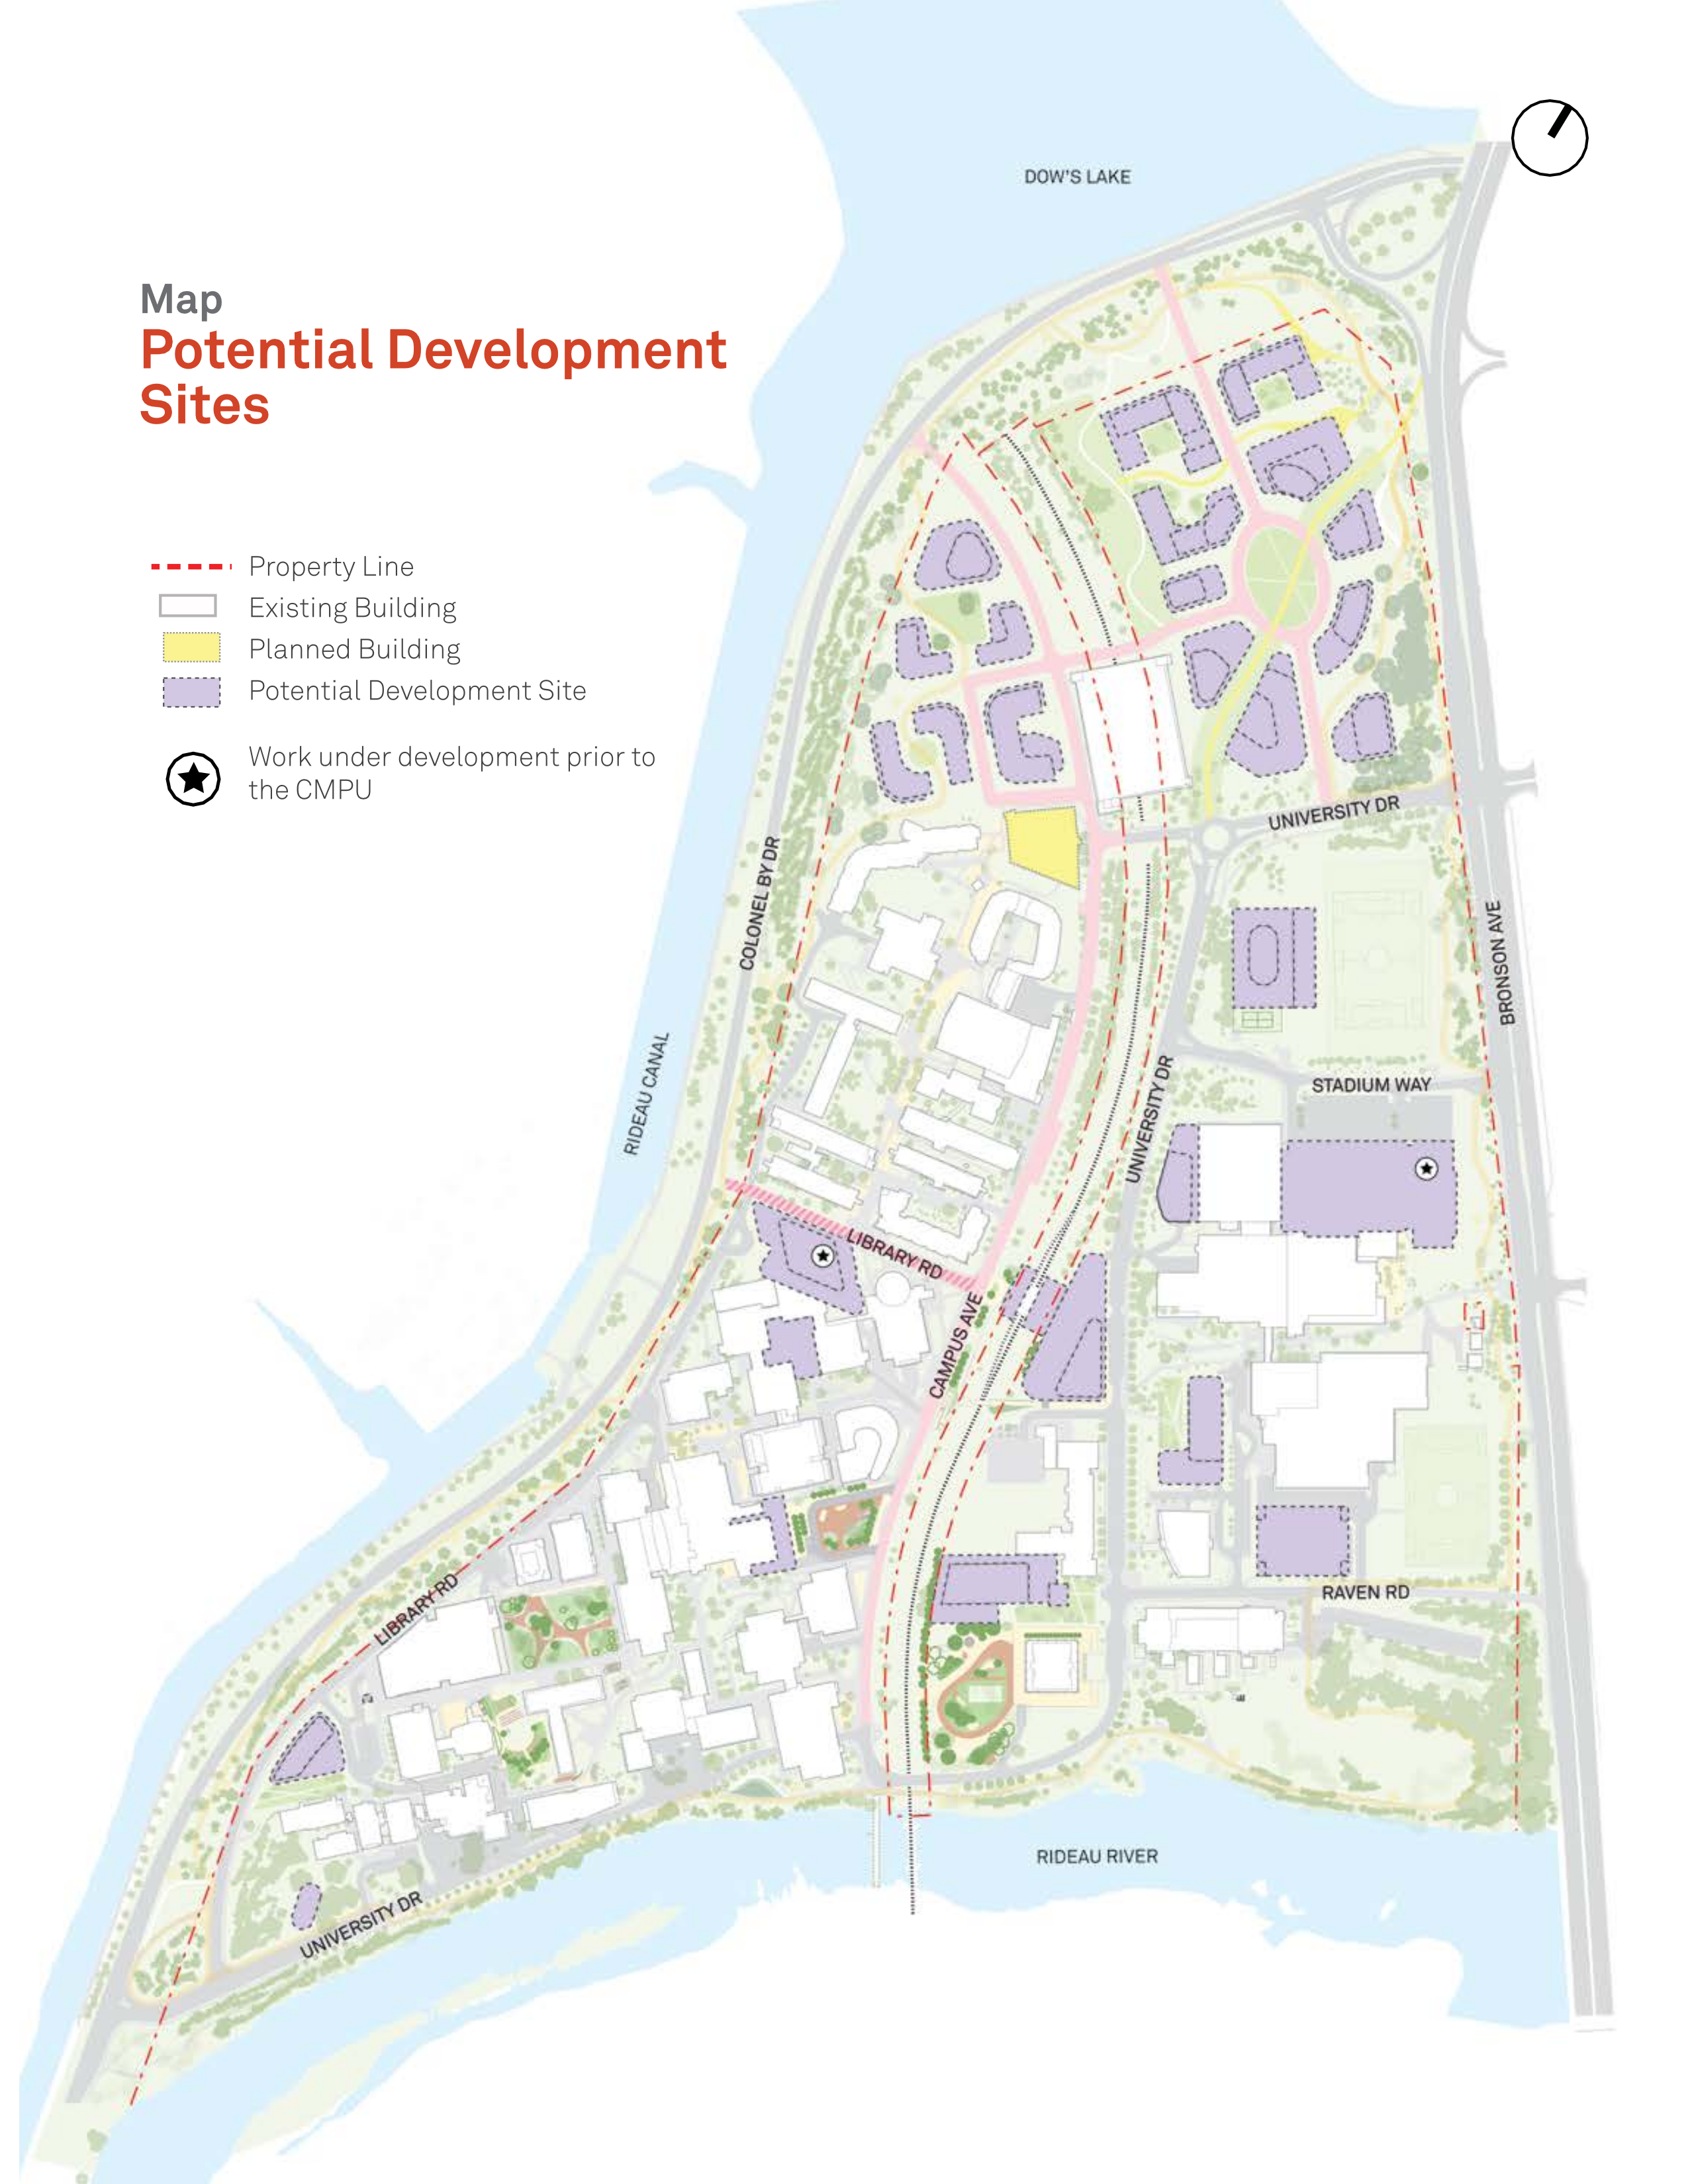 Aerial rendition of the potential development sites